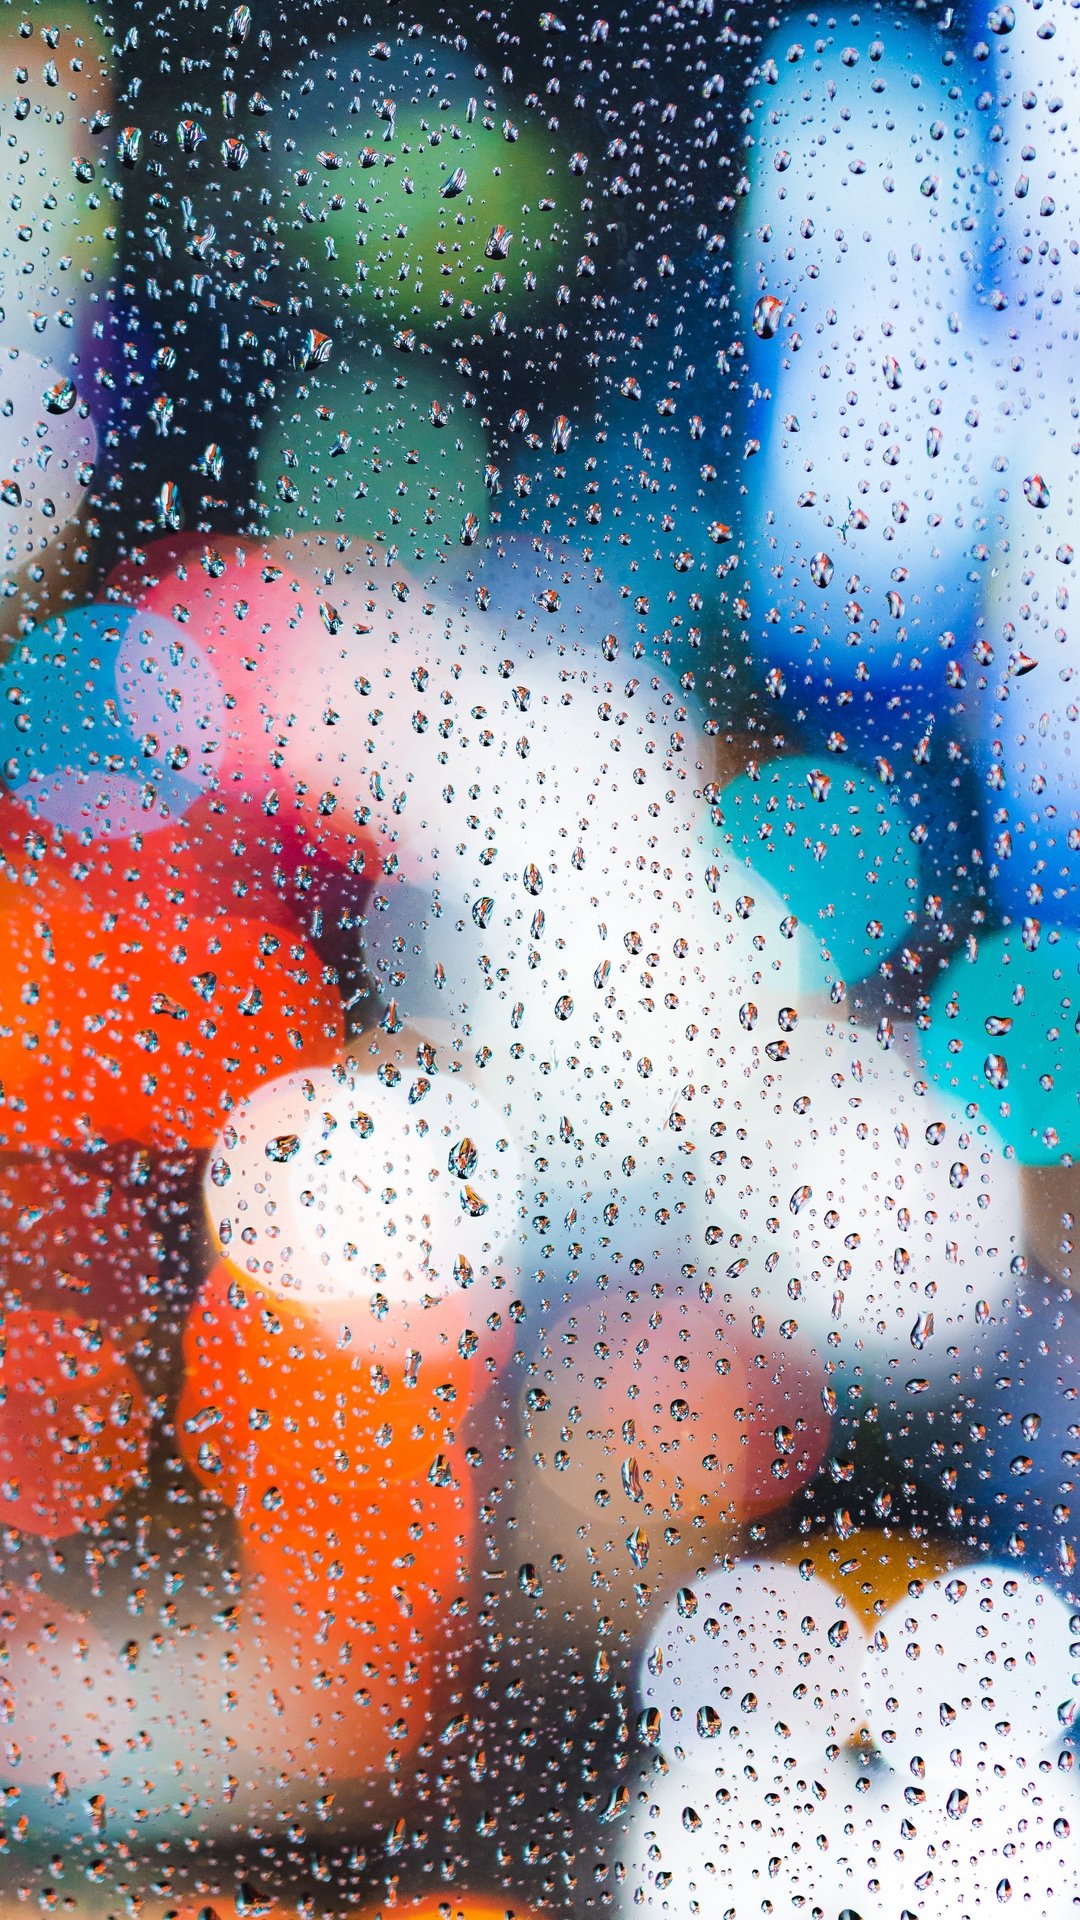 Rain wallpaper for Android